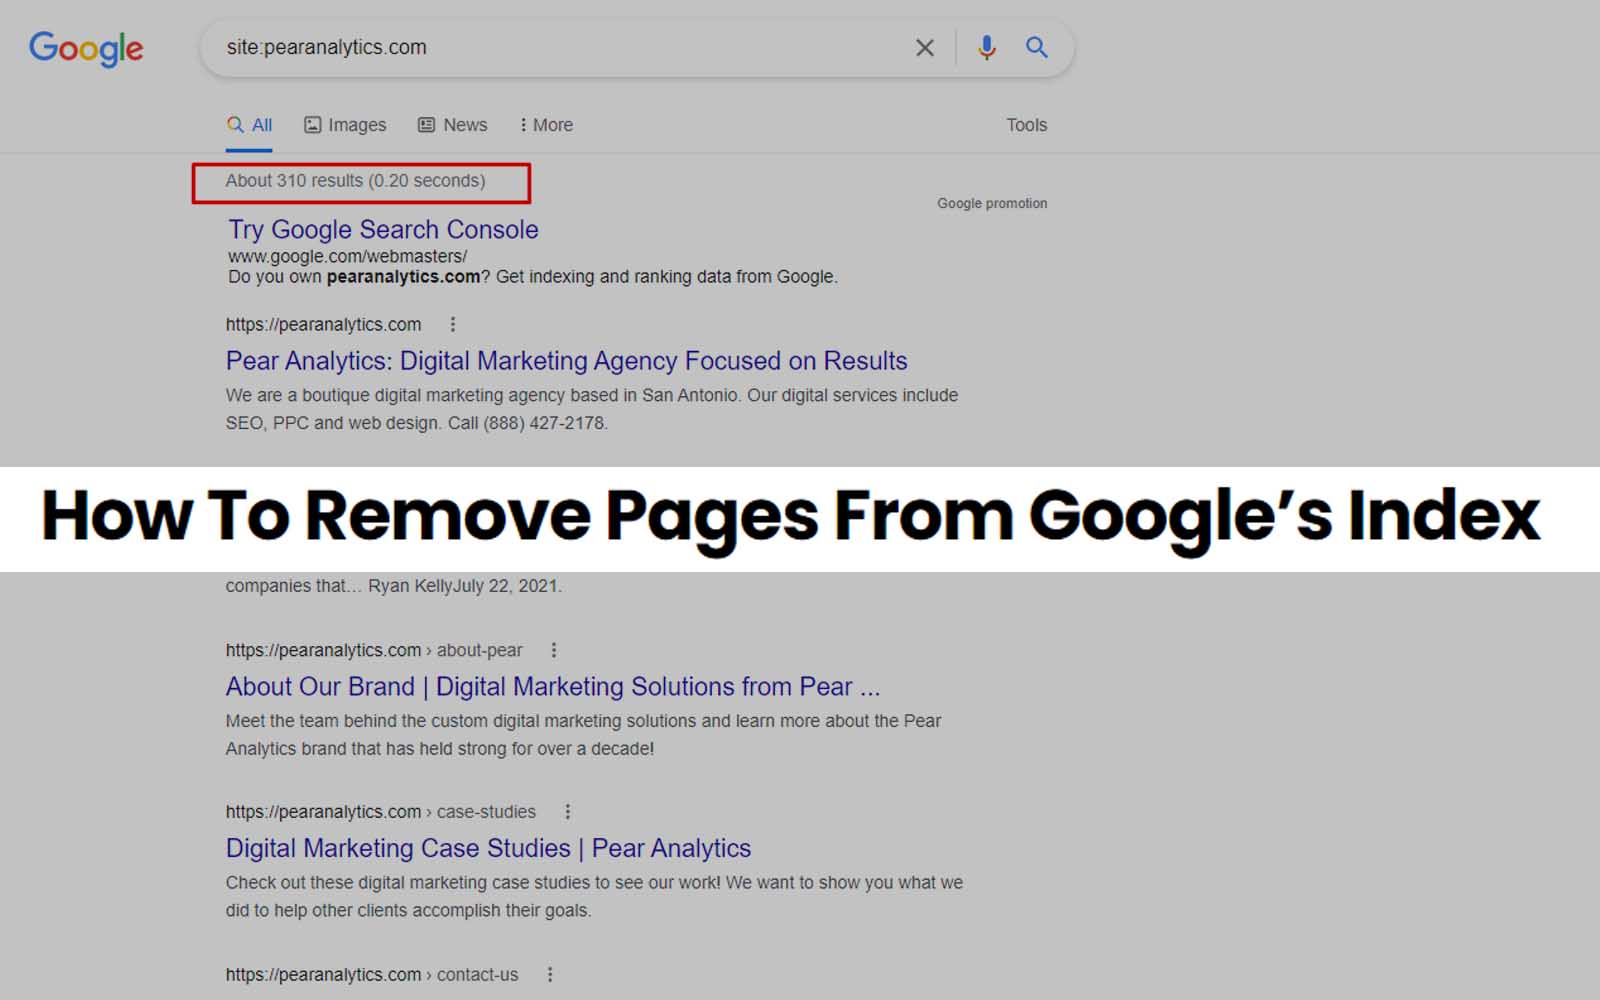 How To Remove Pages From Google’s Index